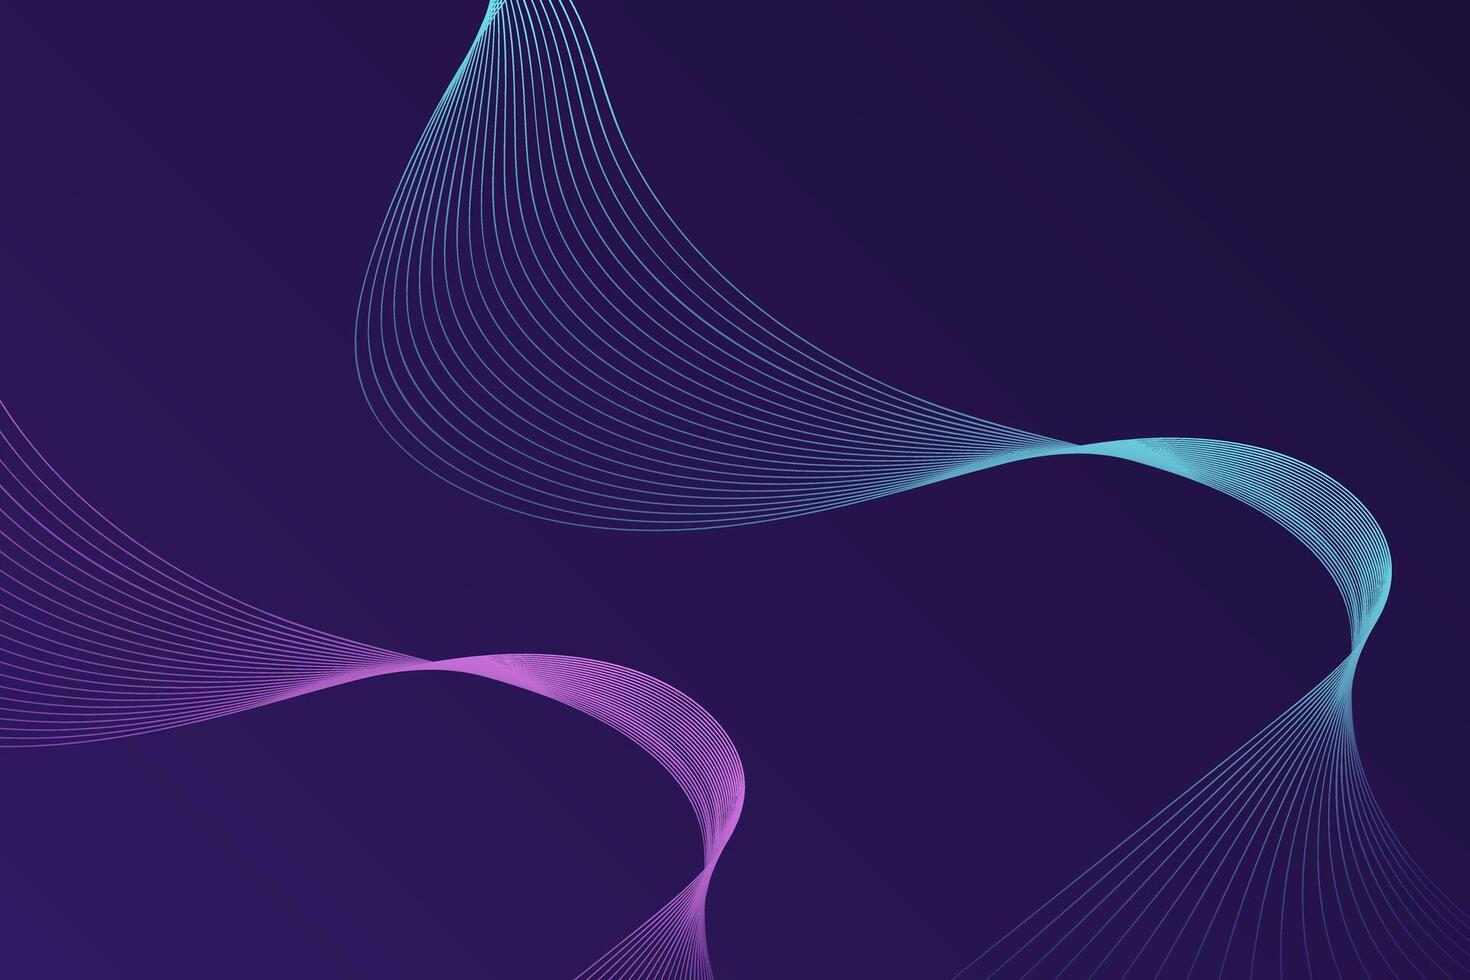 An image featuring a vibrant purple background with wavy lines spreading across it vector